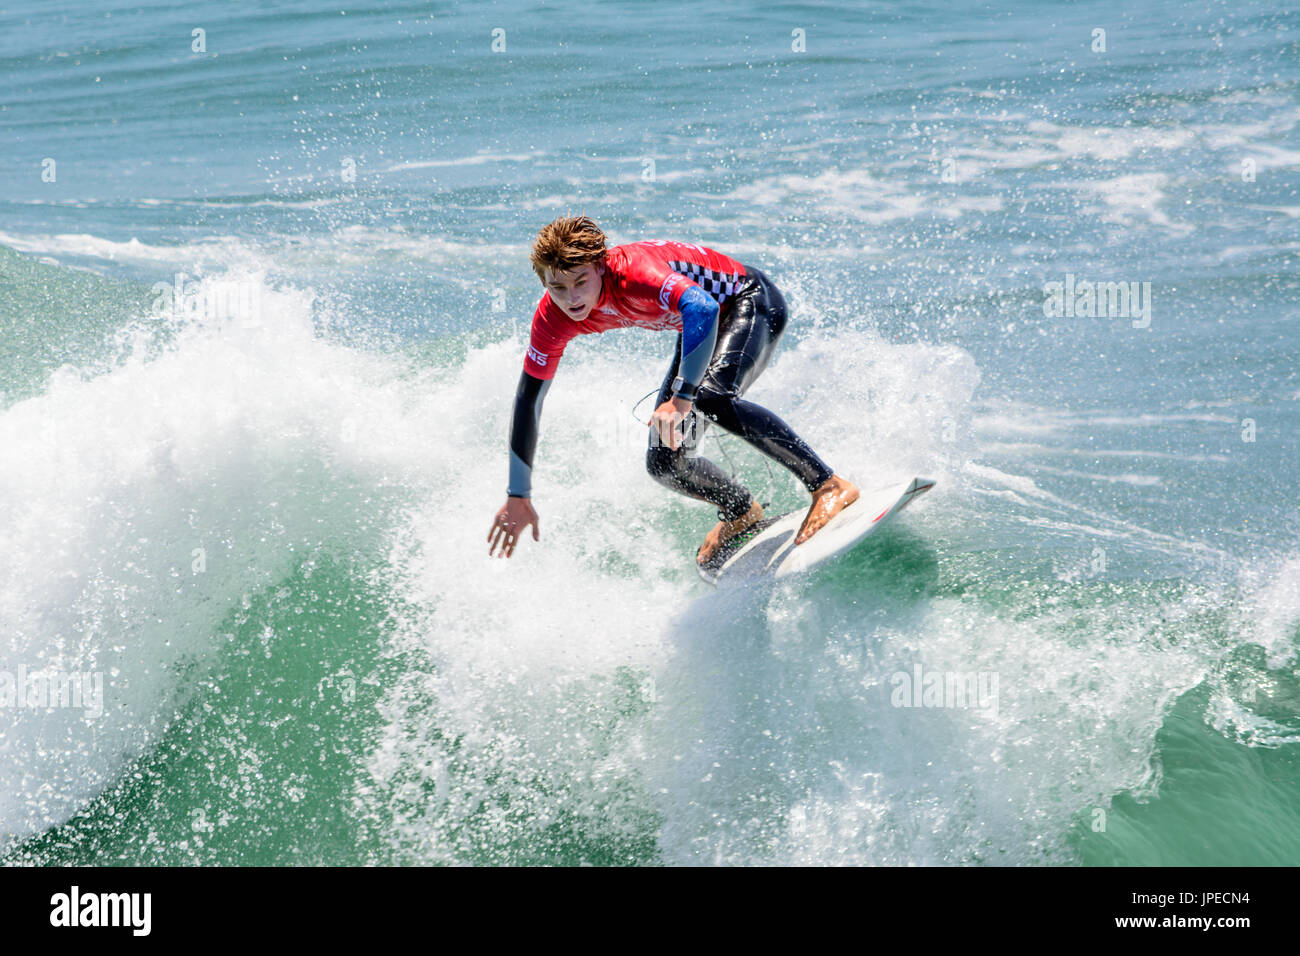 US Open of Surfing in Huntington Beach, CA Stock Photo